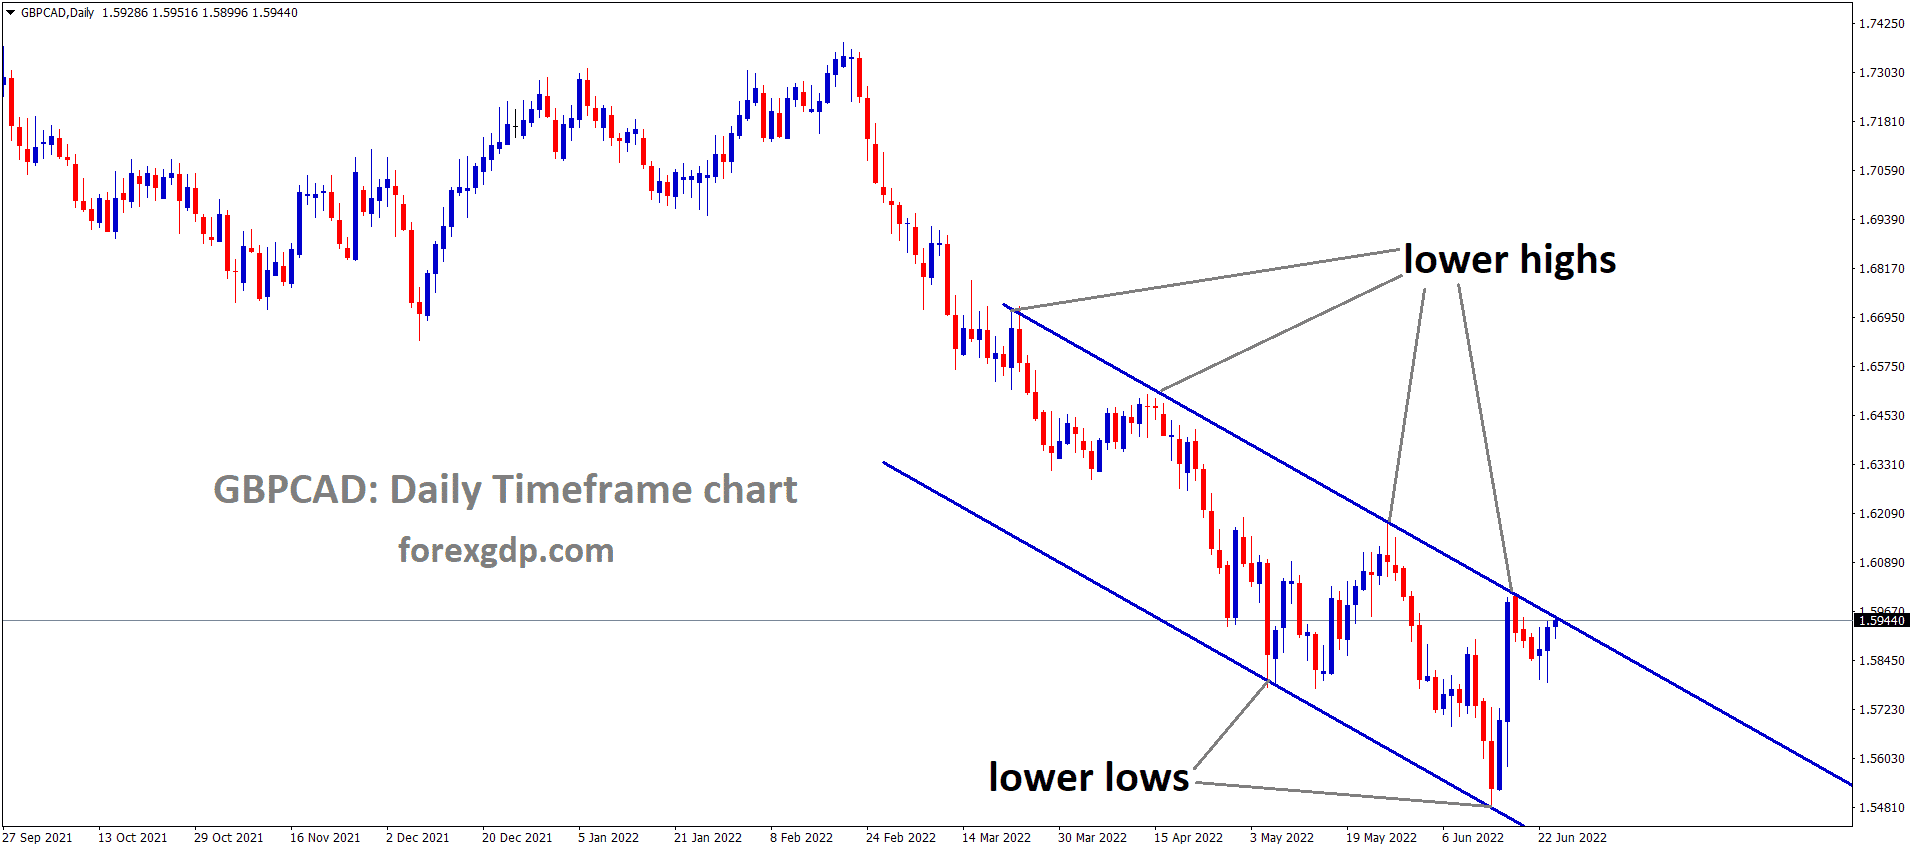 GBPCAD is moving in the Descending channel and the market has reached the Lower high area of the channel 1